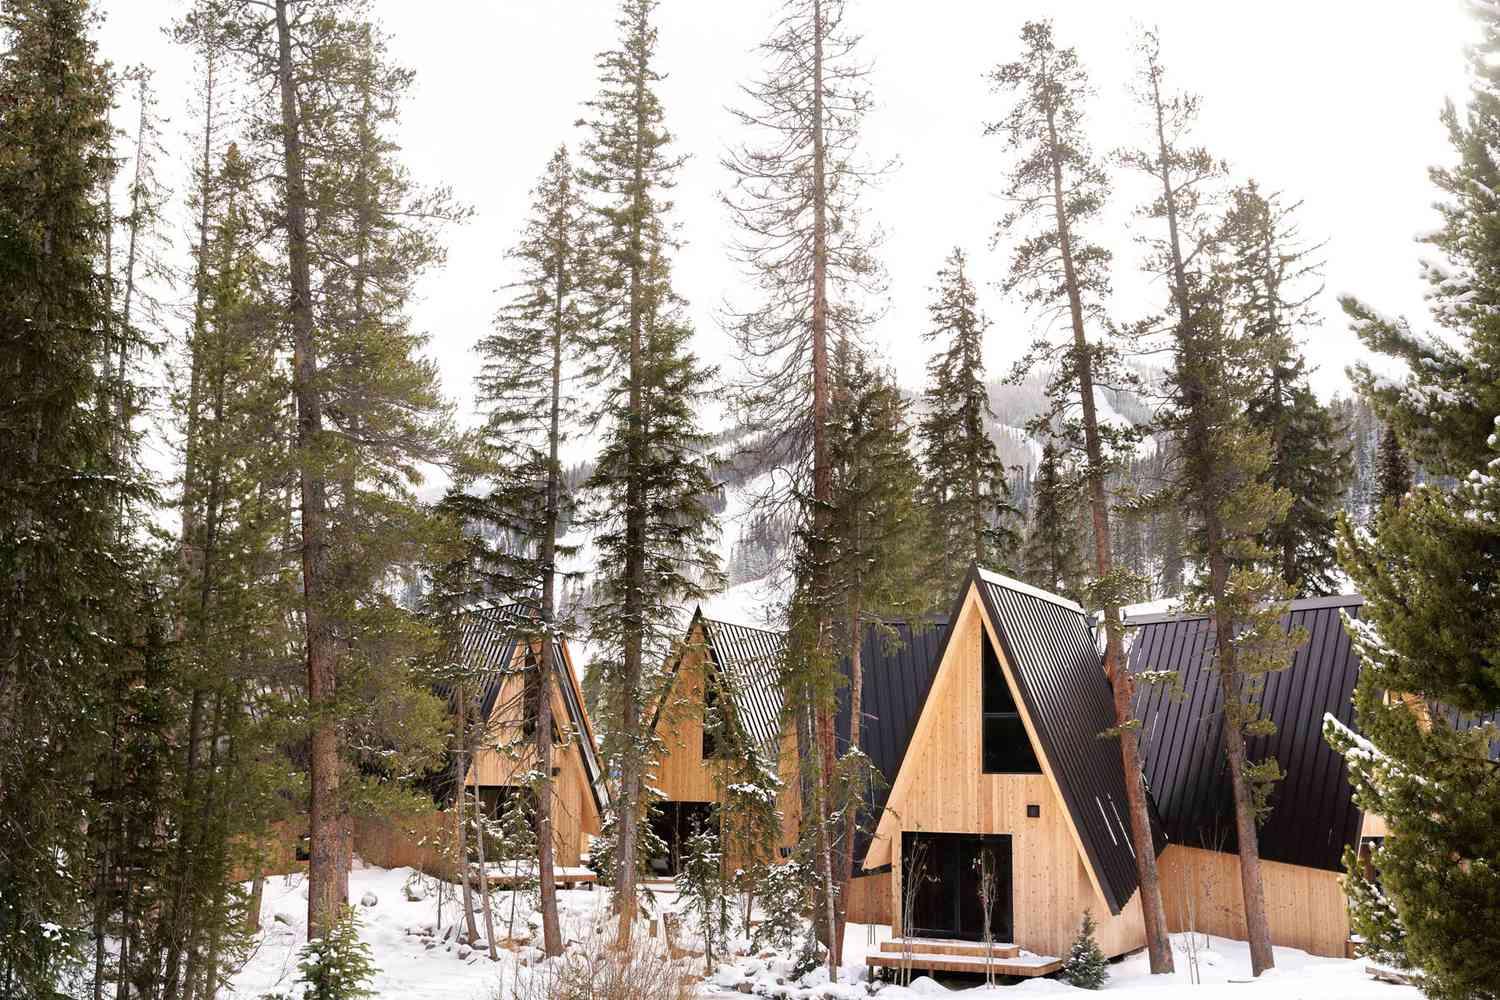  This New Mountain Resort in Colorado Has 31 A-frame Cabins and '70s-chic Ski Style 